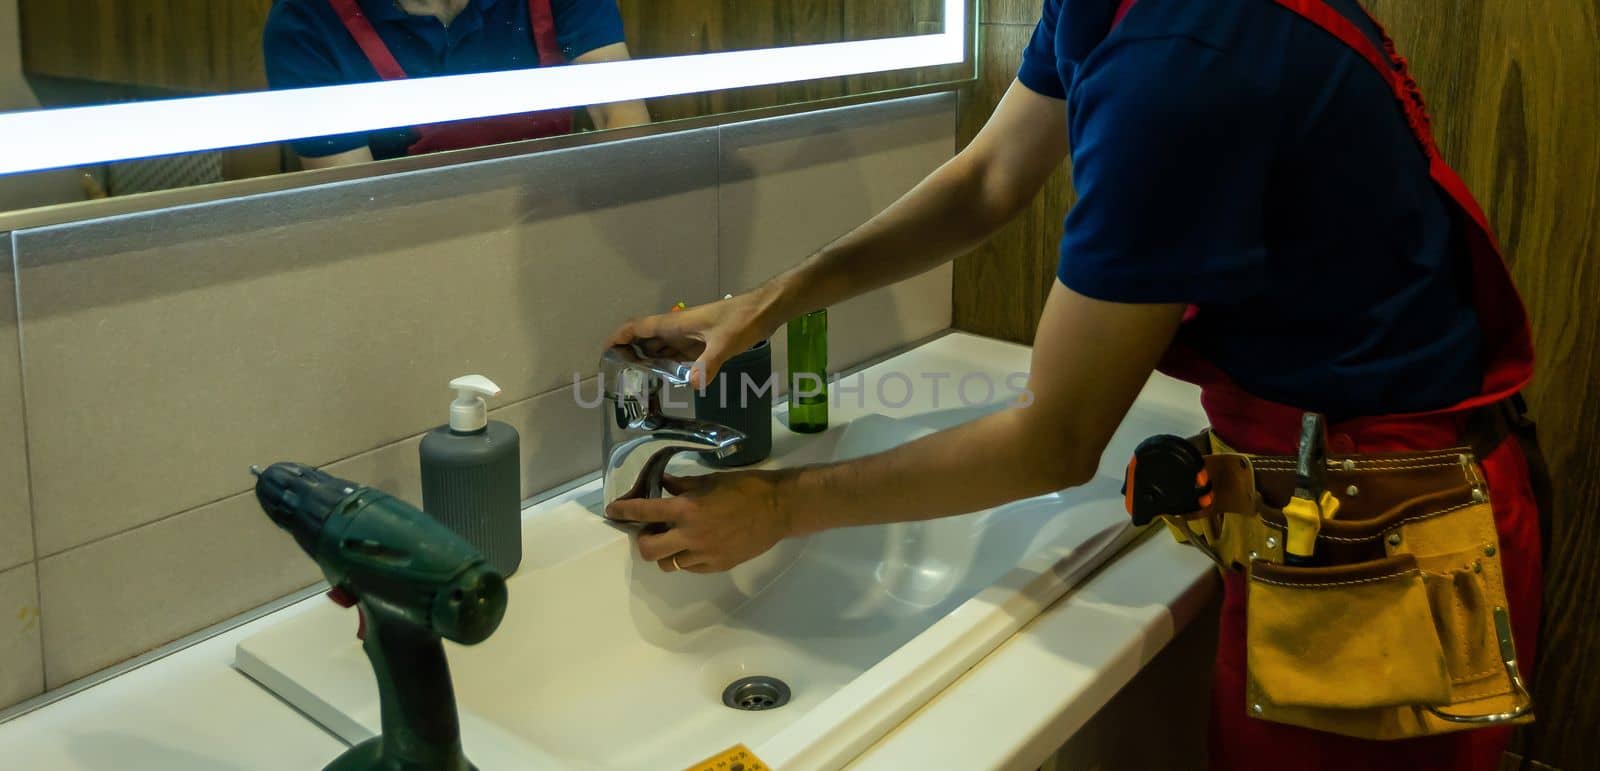 Plumber Mending Tap With Adjustable Wrench.